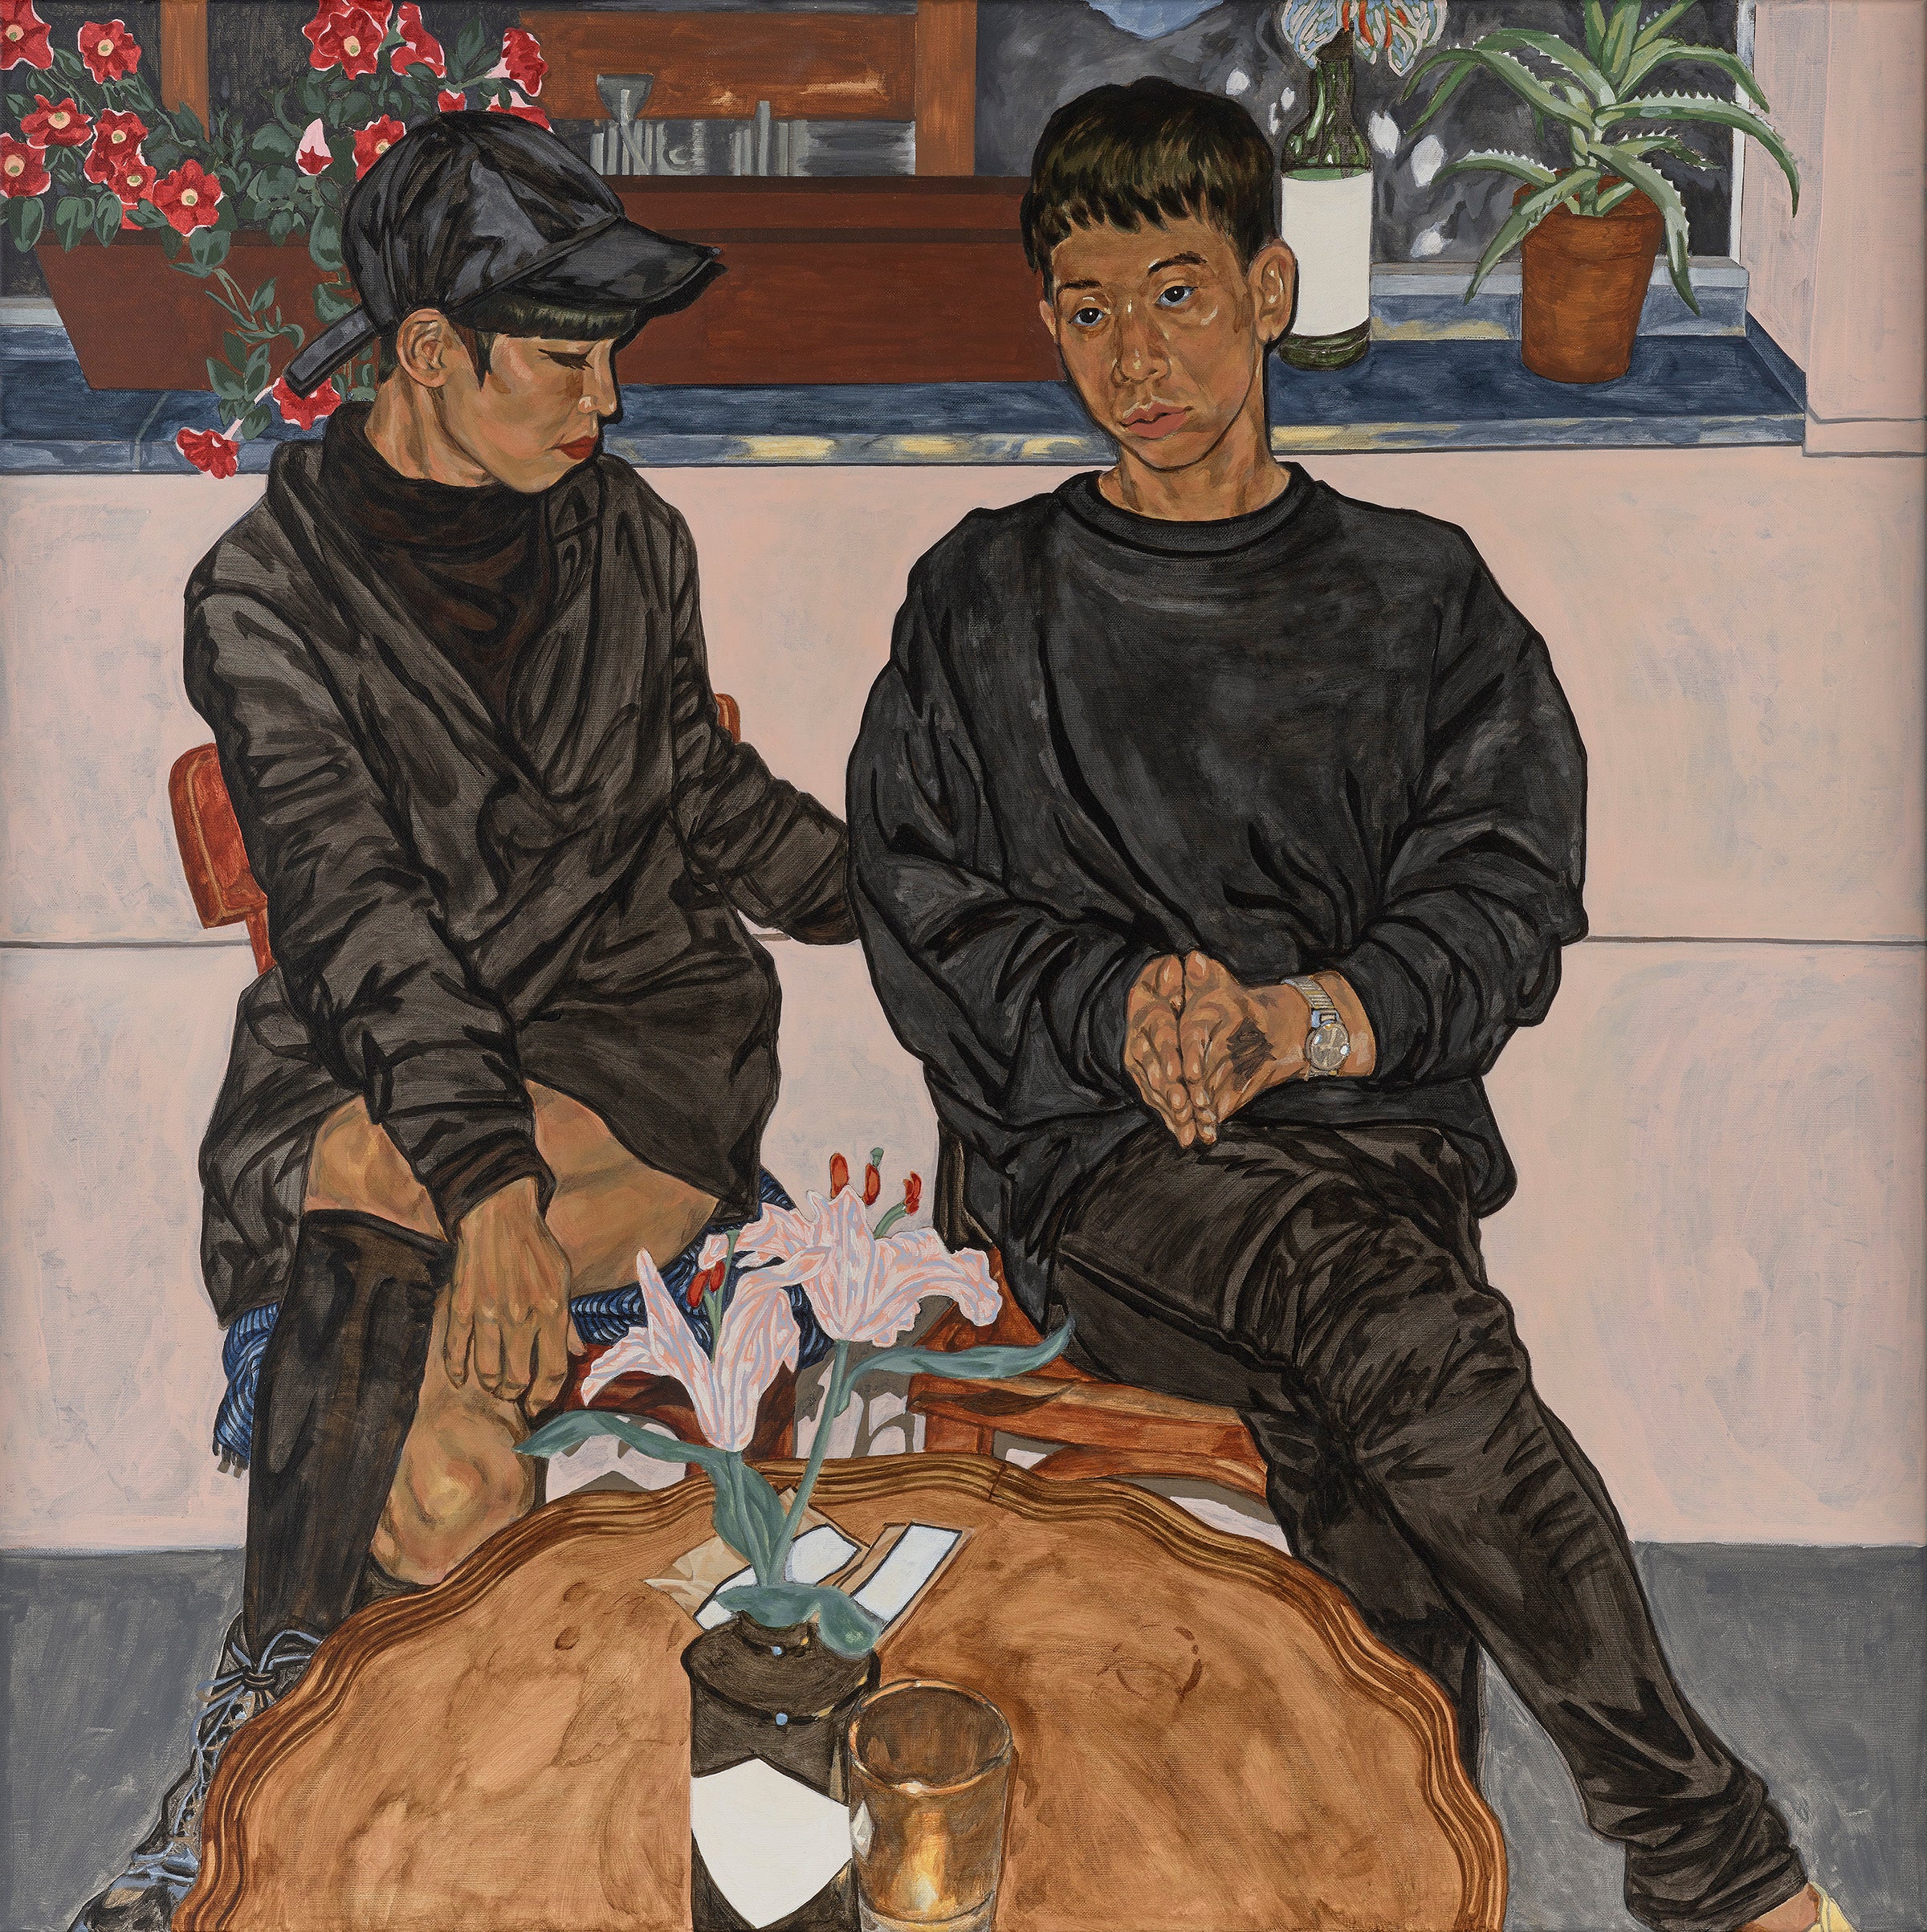 ‘Night Talk’ by Jiab Prachakul was among the pieces shortlisted for the BP Portrait Award 2020